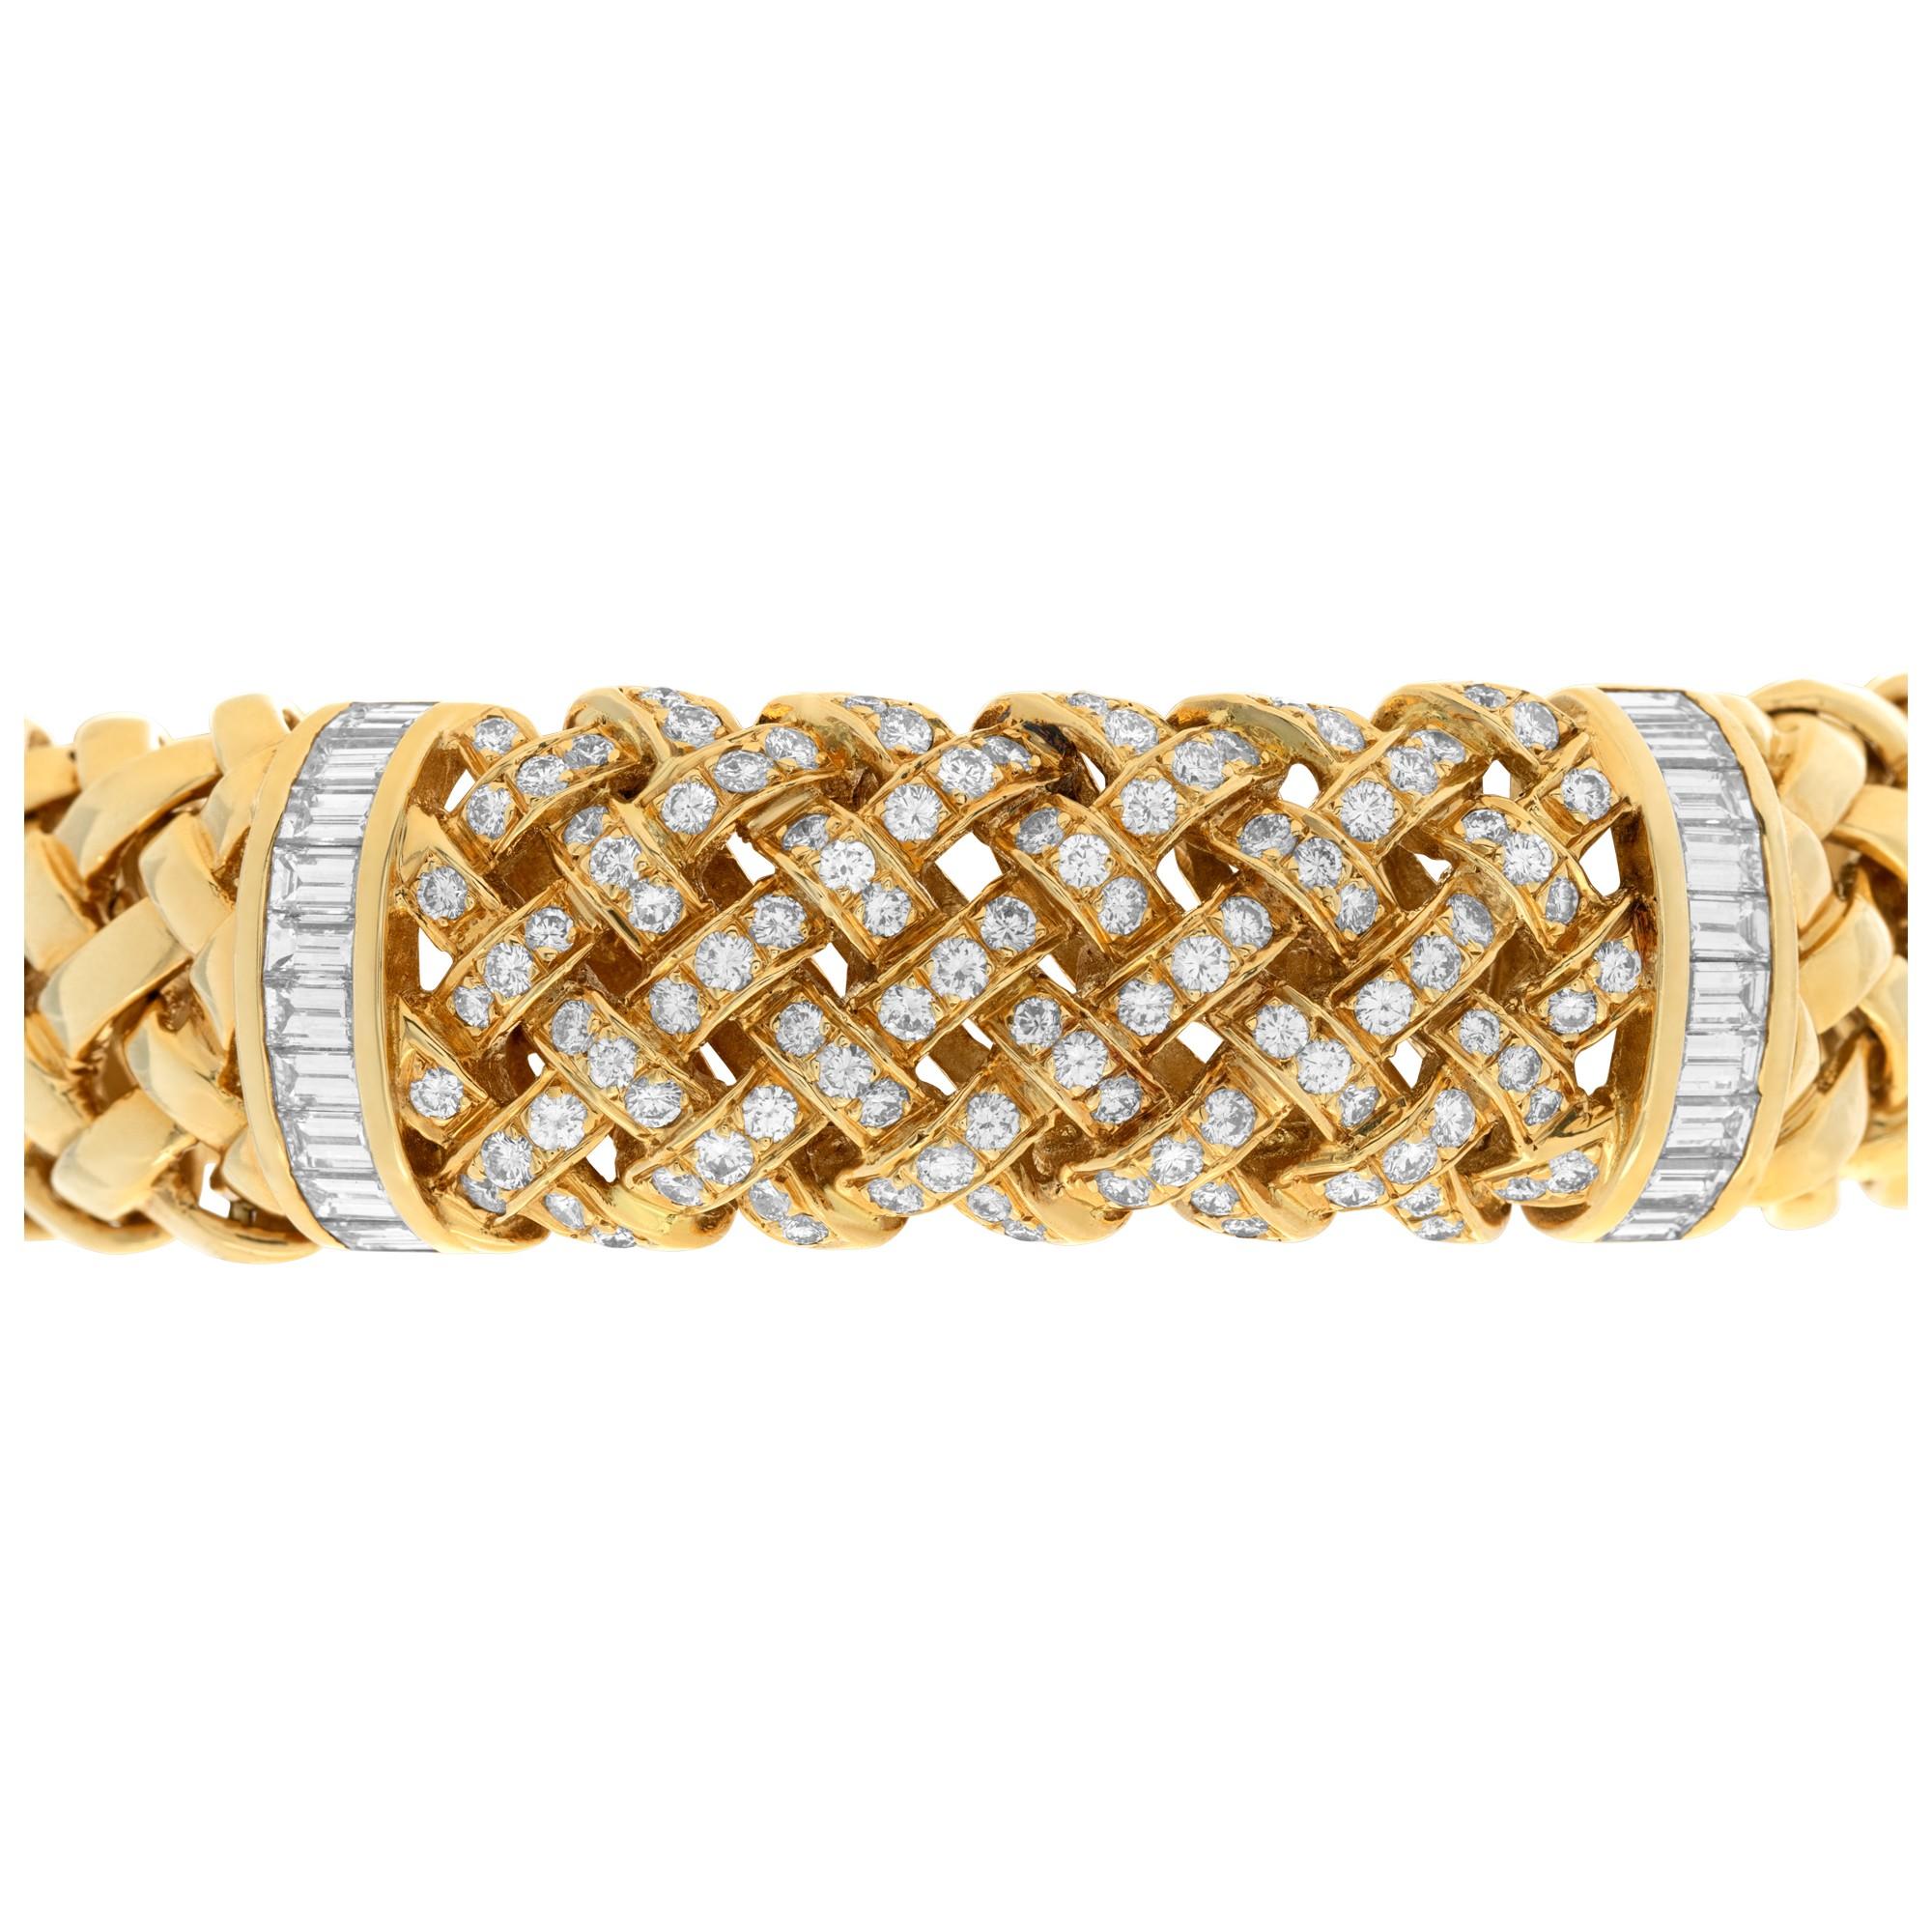 ESTIMATED RETAIL: $45,130.00
YOUR PRICE: $21,840.00

Tiffany & Co. Vannerie collection bracelet in 18K yellow gold. 
Woven link bracelet in polished 18k yellow gold with approximately 3 carats full round brilliant and baguette cut diamonds